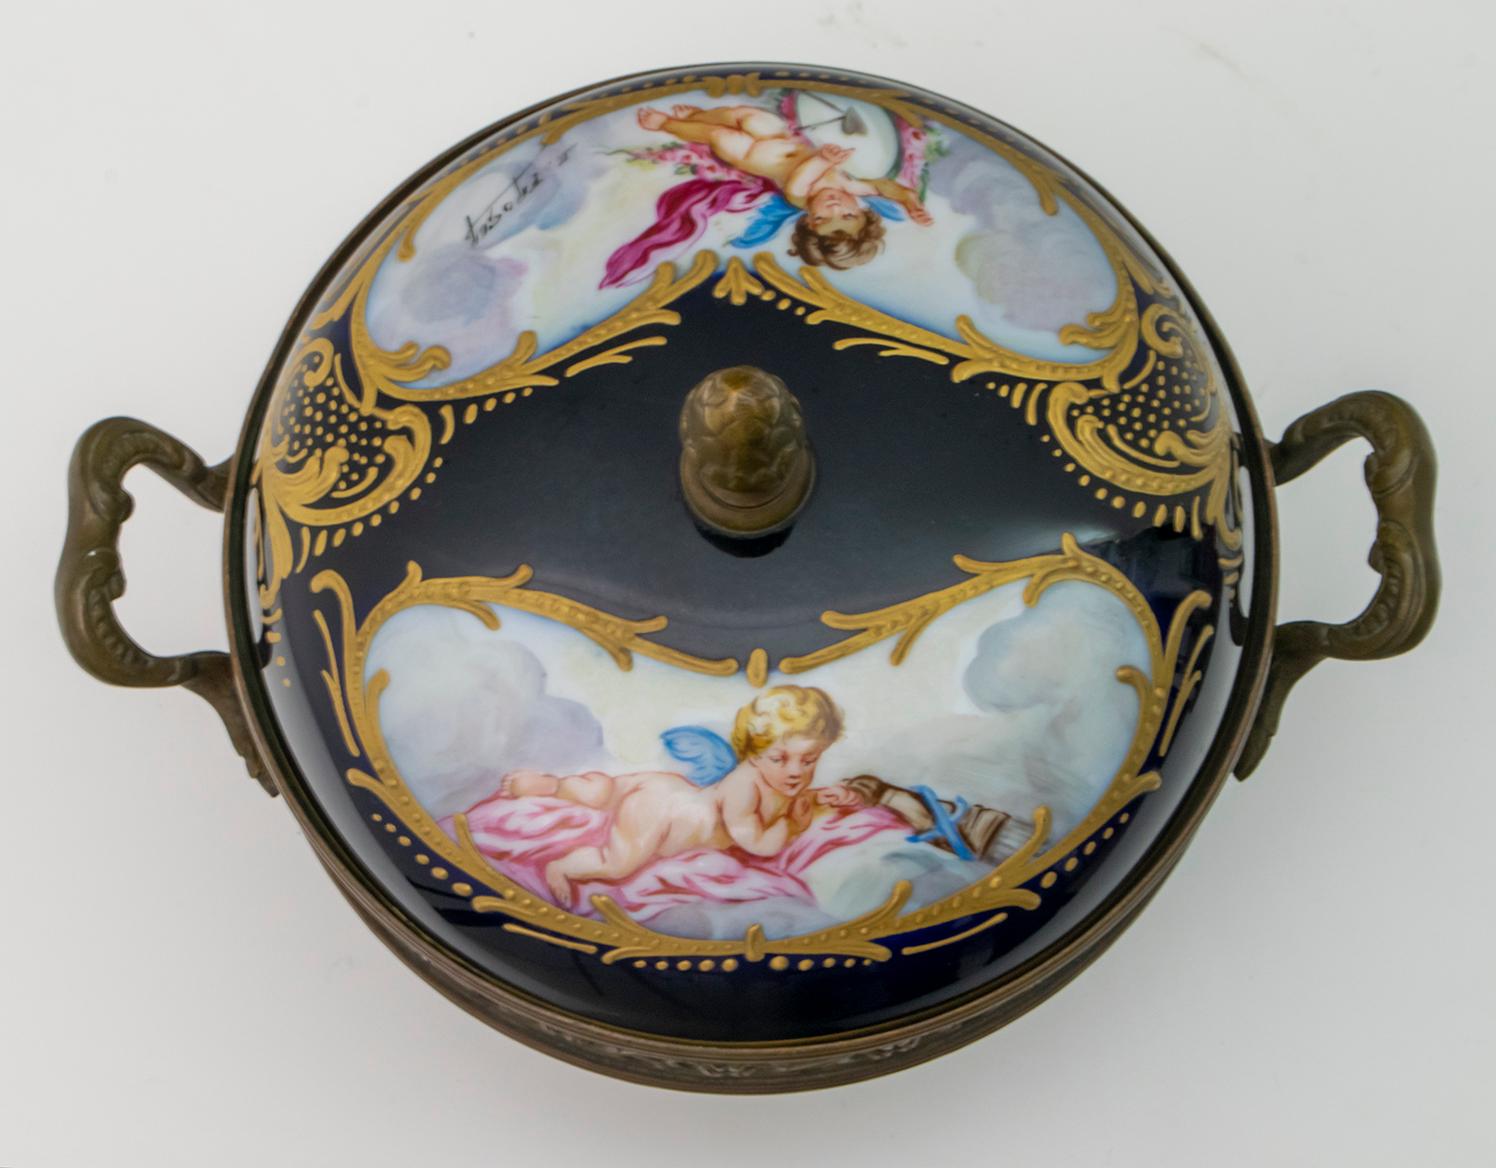 Signed E. Froger 19th Century French Porcelain Potpourri by Sevres, 1880 For Sale 9